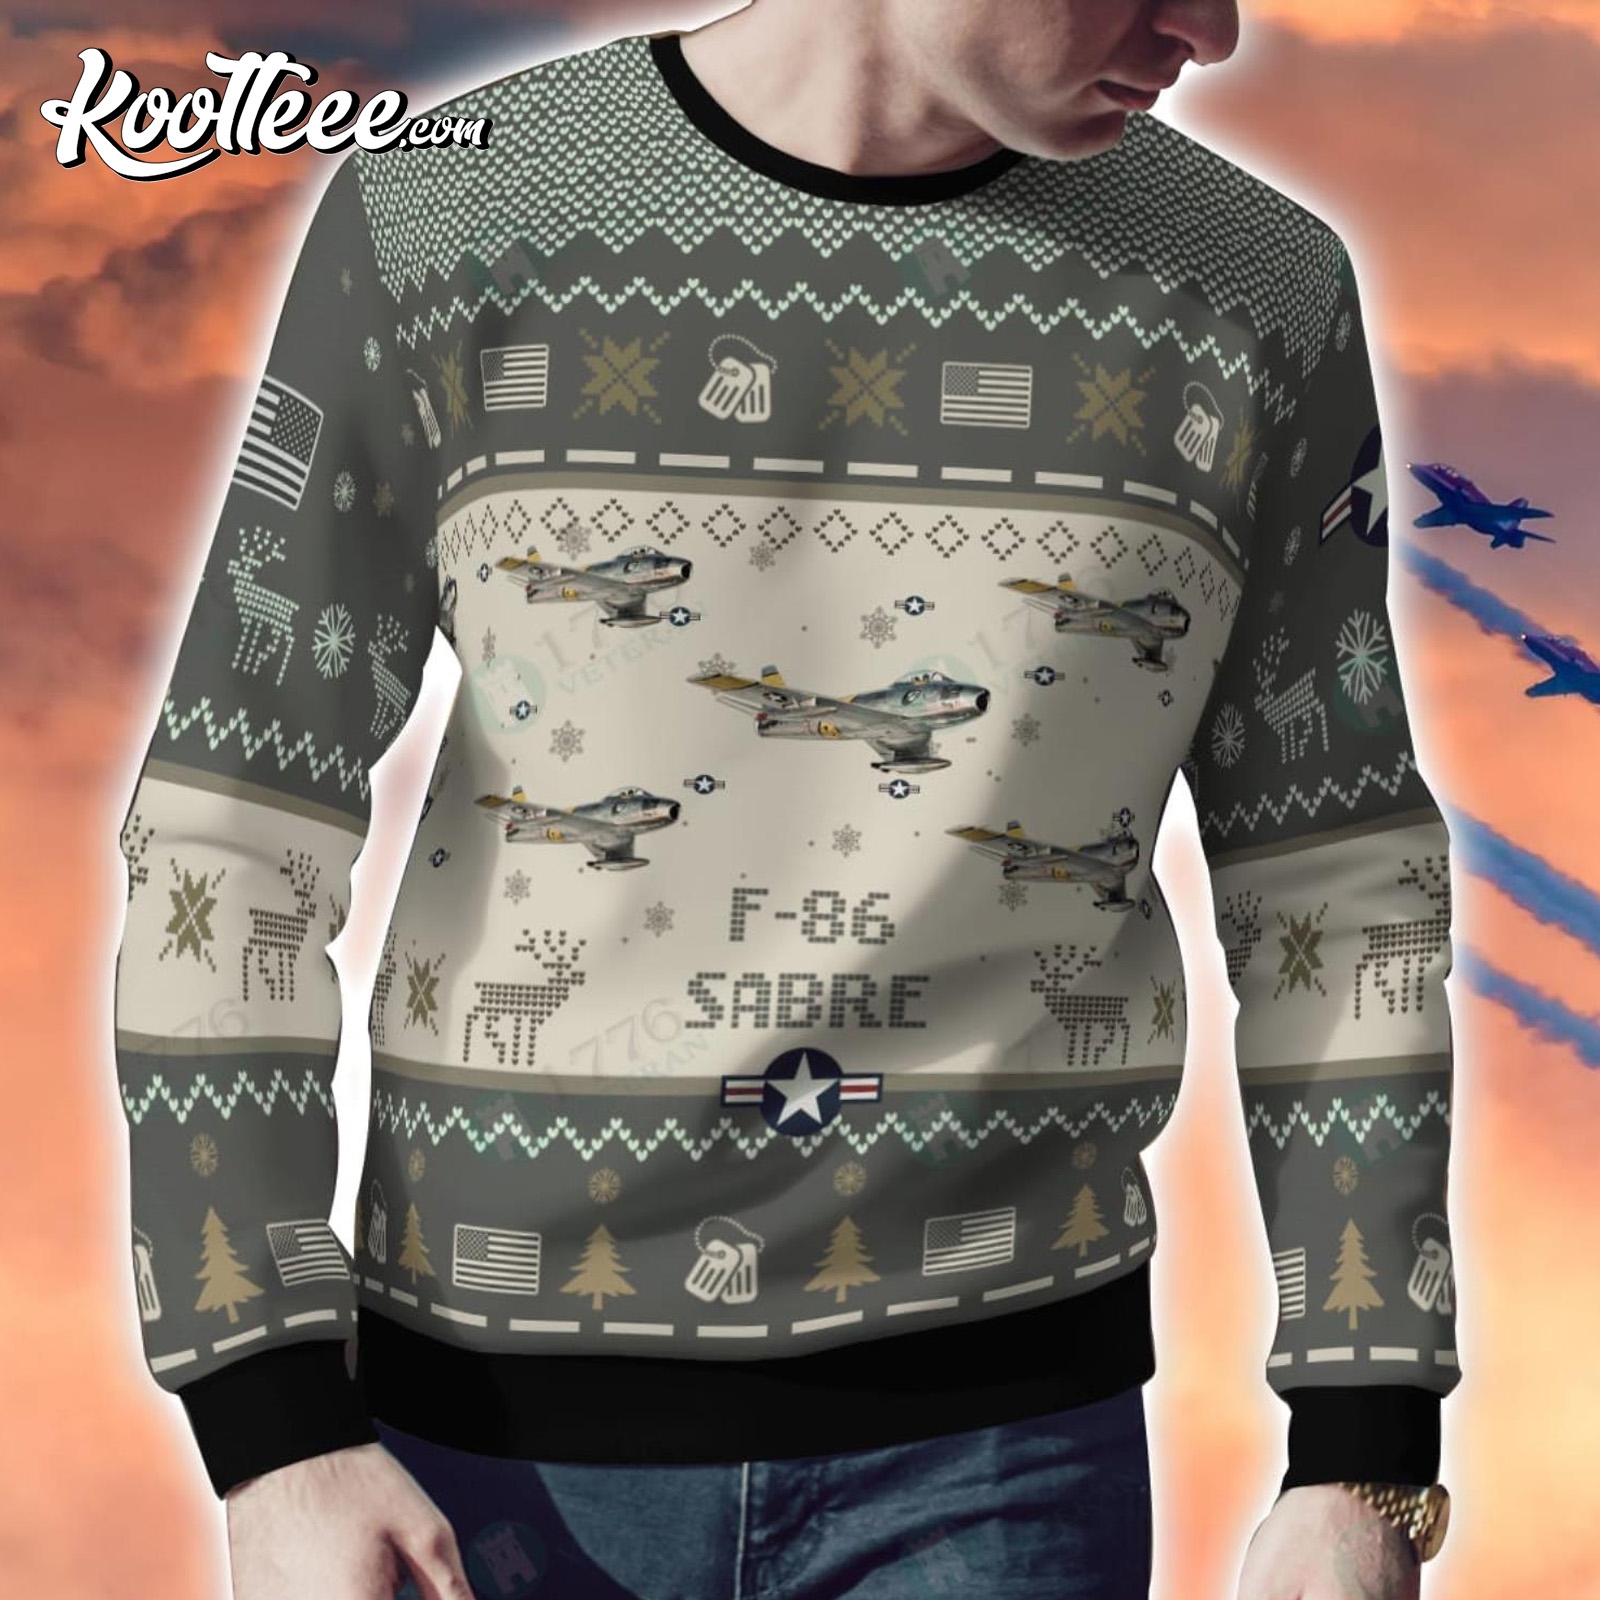 F86 Sabre Jet Fighter Aircraft Ugly Sweater